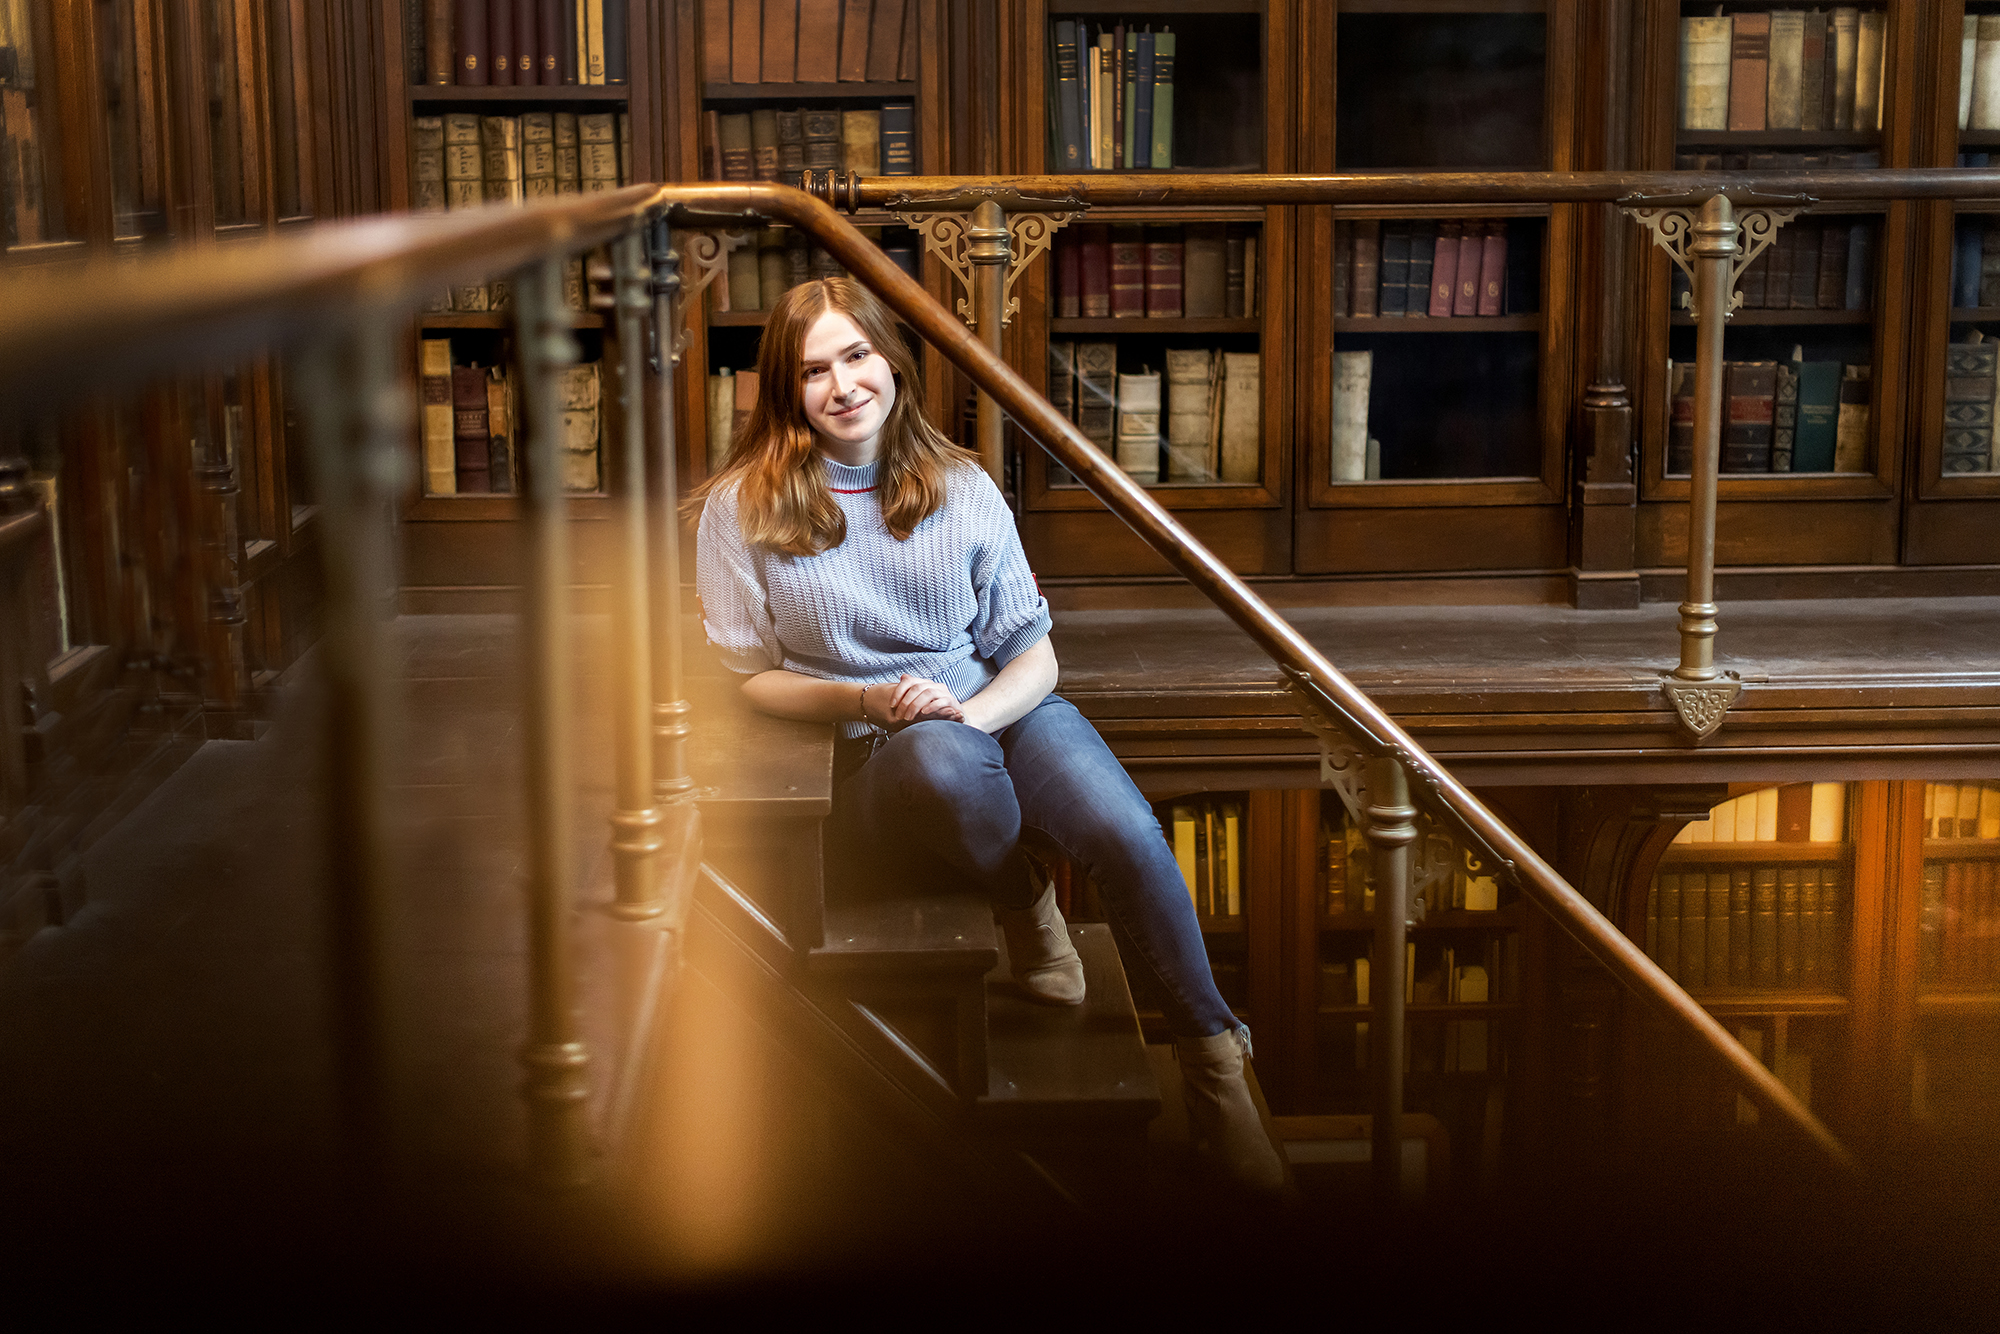 Aili Waller sitting on the stairway in a historic library with books behind her in glass-doored shelving. 